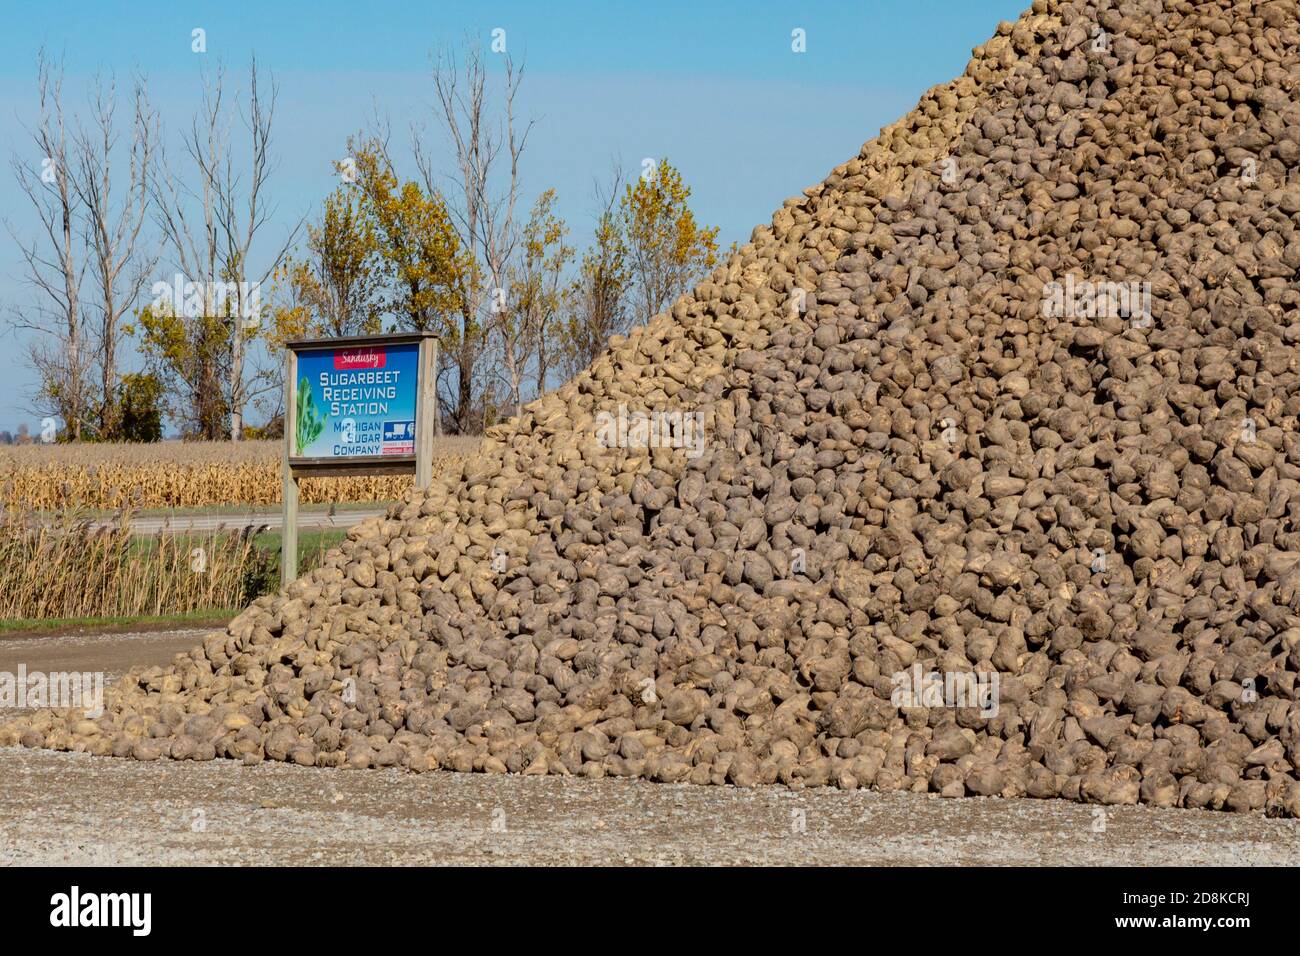 Sandusky, Michigan - Sugar beets are piled up awaiting processing at one of Michigan Sugar Company's receiving stations. The company is a farmer-owned Stock Photo